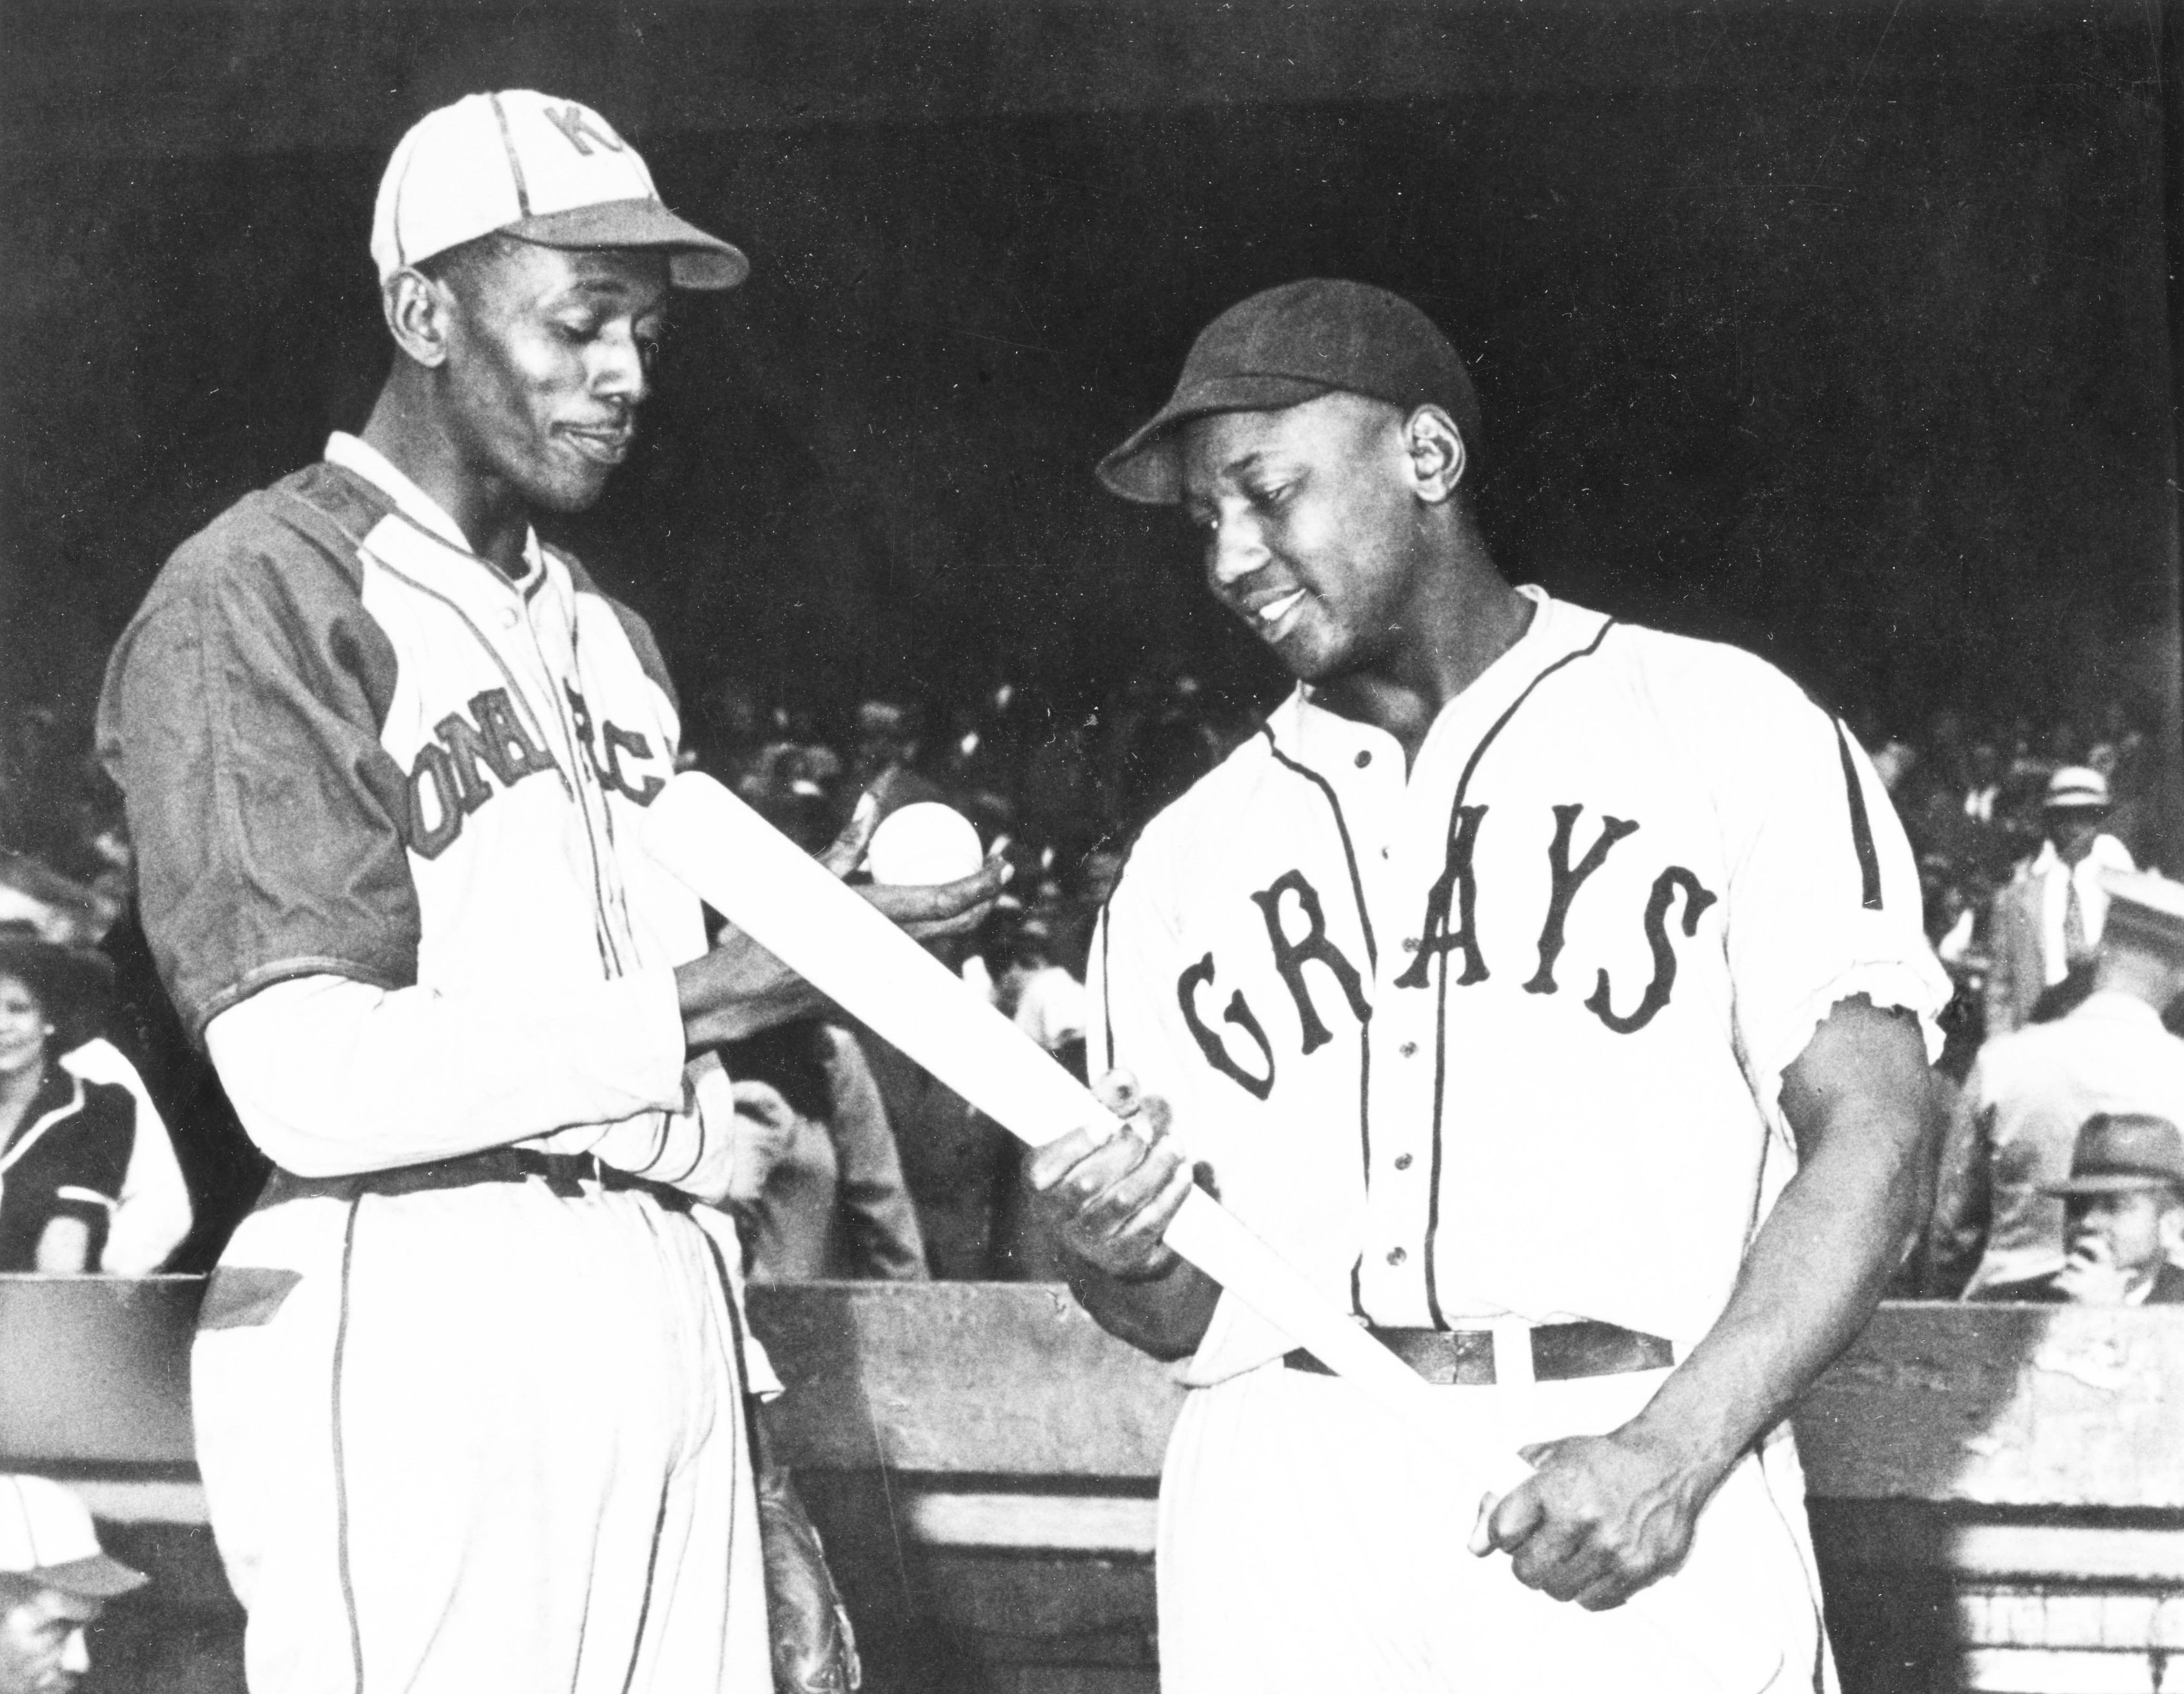 In 1947, Major League Baseball tried to ease racial tensions with